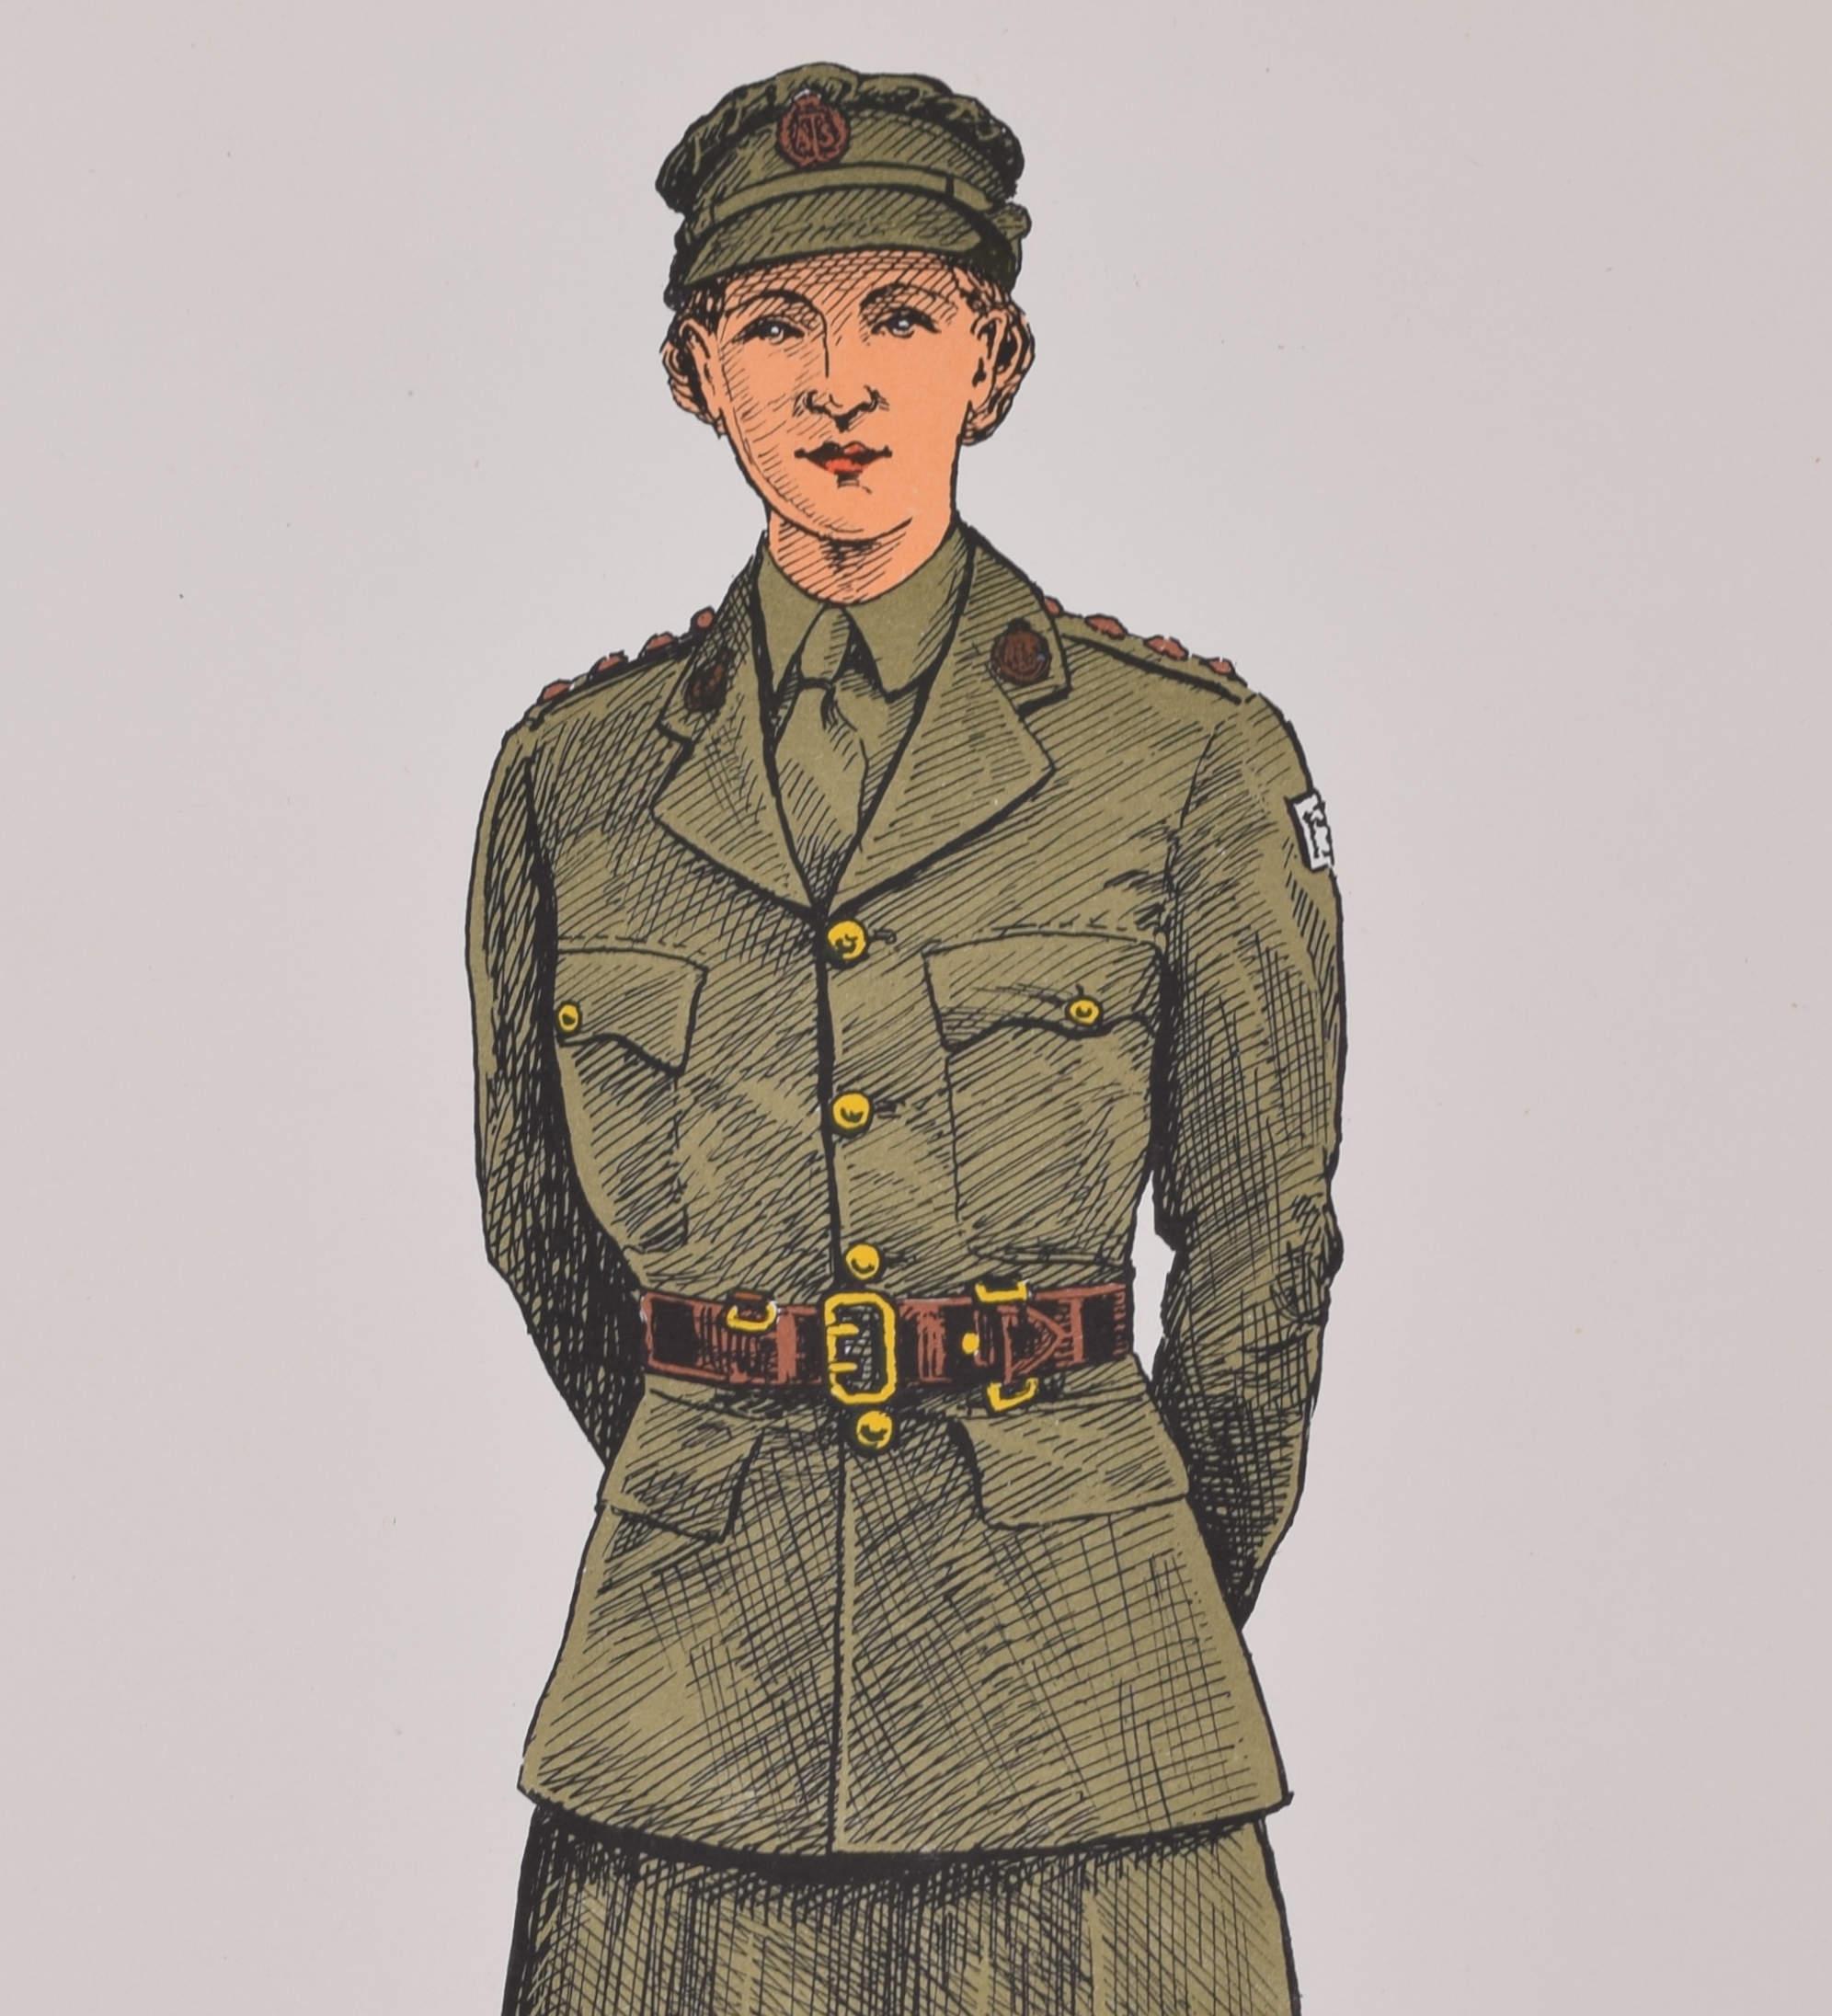 Women's Royal Army Corps Institute of Army Education WW2 uniform lithograph - Print by Unknown